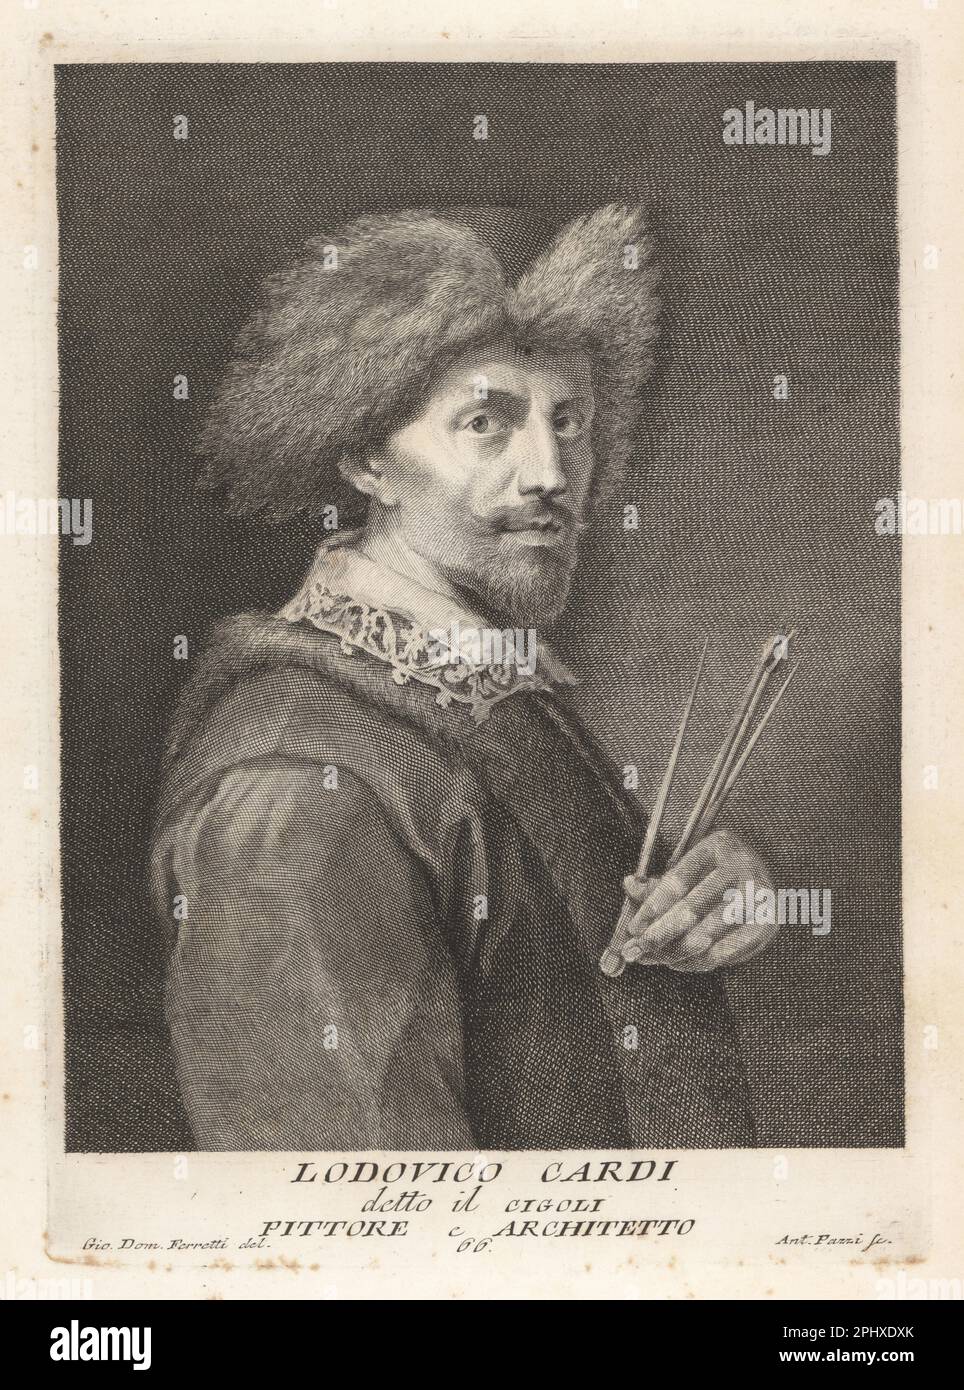 Lodovico Cardi, also known as il Cigoli, Italian painter, scholar and architect of the late Mannerist and early Baroque period, 1559-1613. In fur hat holding paint brushes and pair of compasses. Copperplate engraving by Pietro Antonio Pazzi after Giovanni Domenico Campiglia after a self portrait by the artist from Francesco Moucke's Museo Florentino (Museum Florentinum), Serie di Ritratti de Pittori (Series of Portraits of Painters) stamperia Mouckiana, Florence, 1752-62. Stock Photo